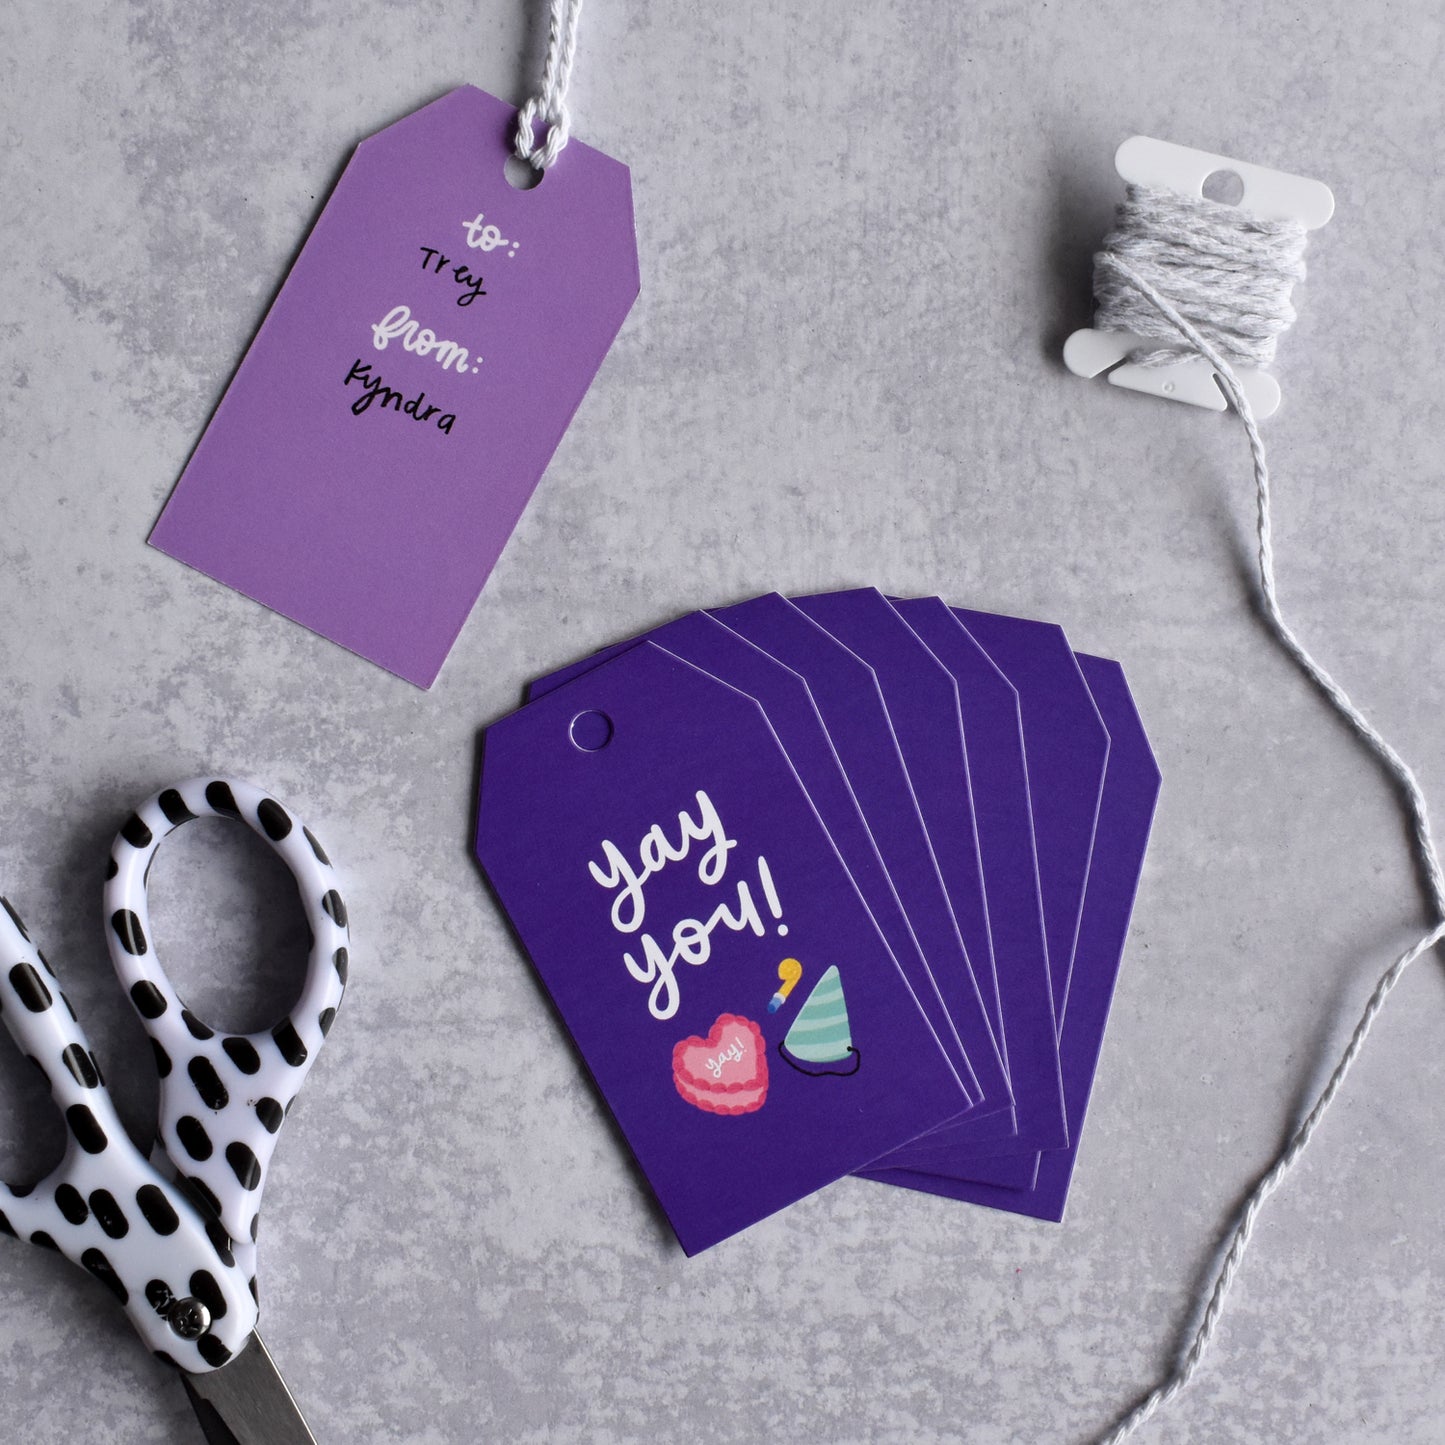 Yay You Gift Tags